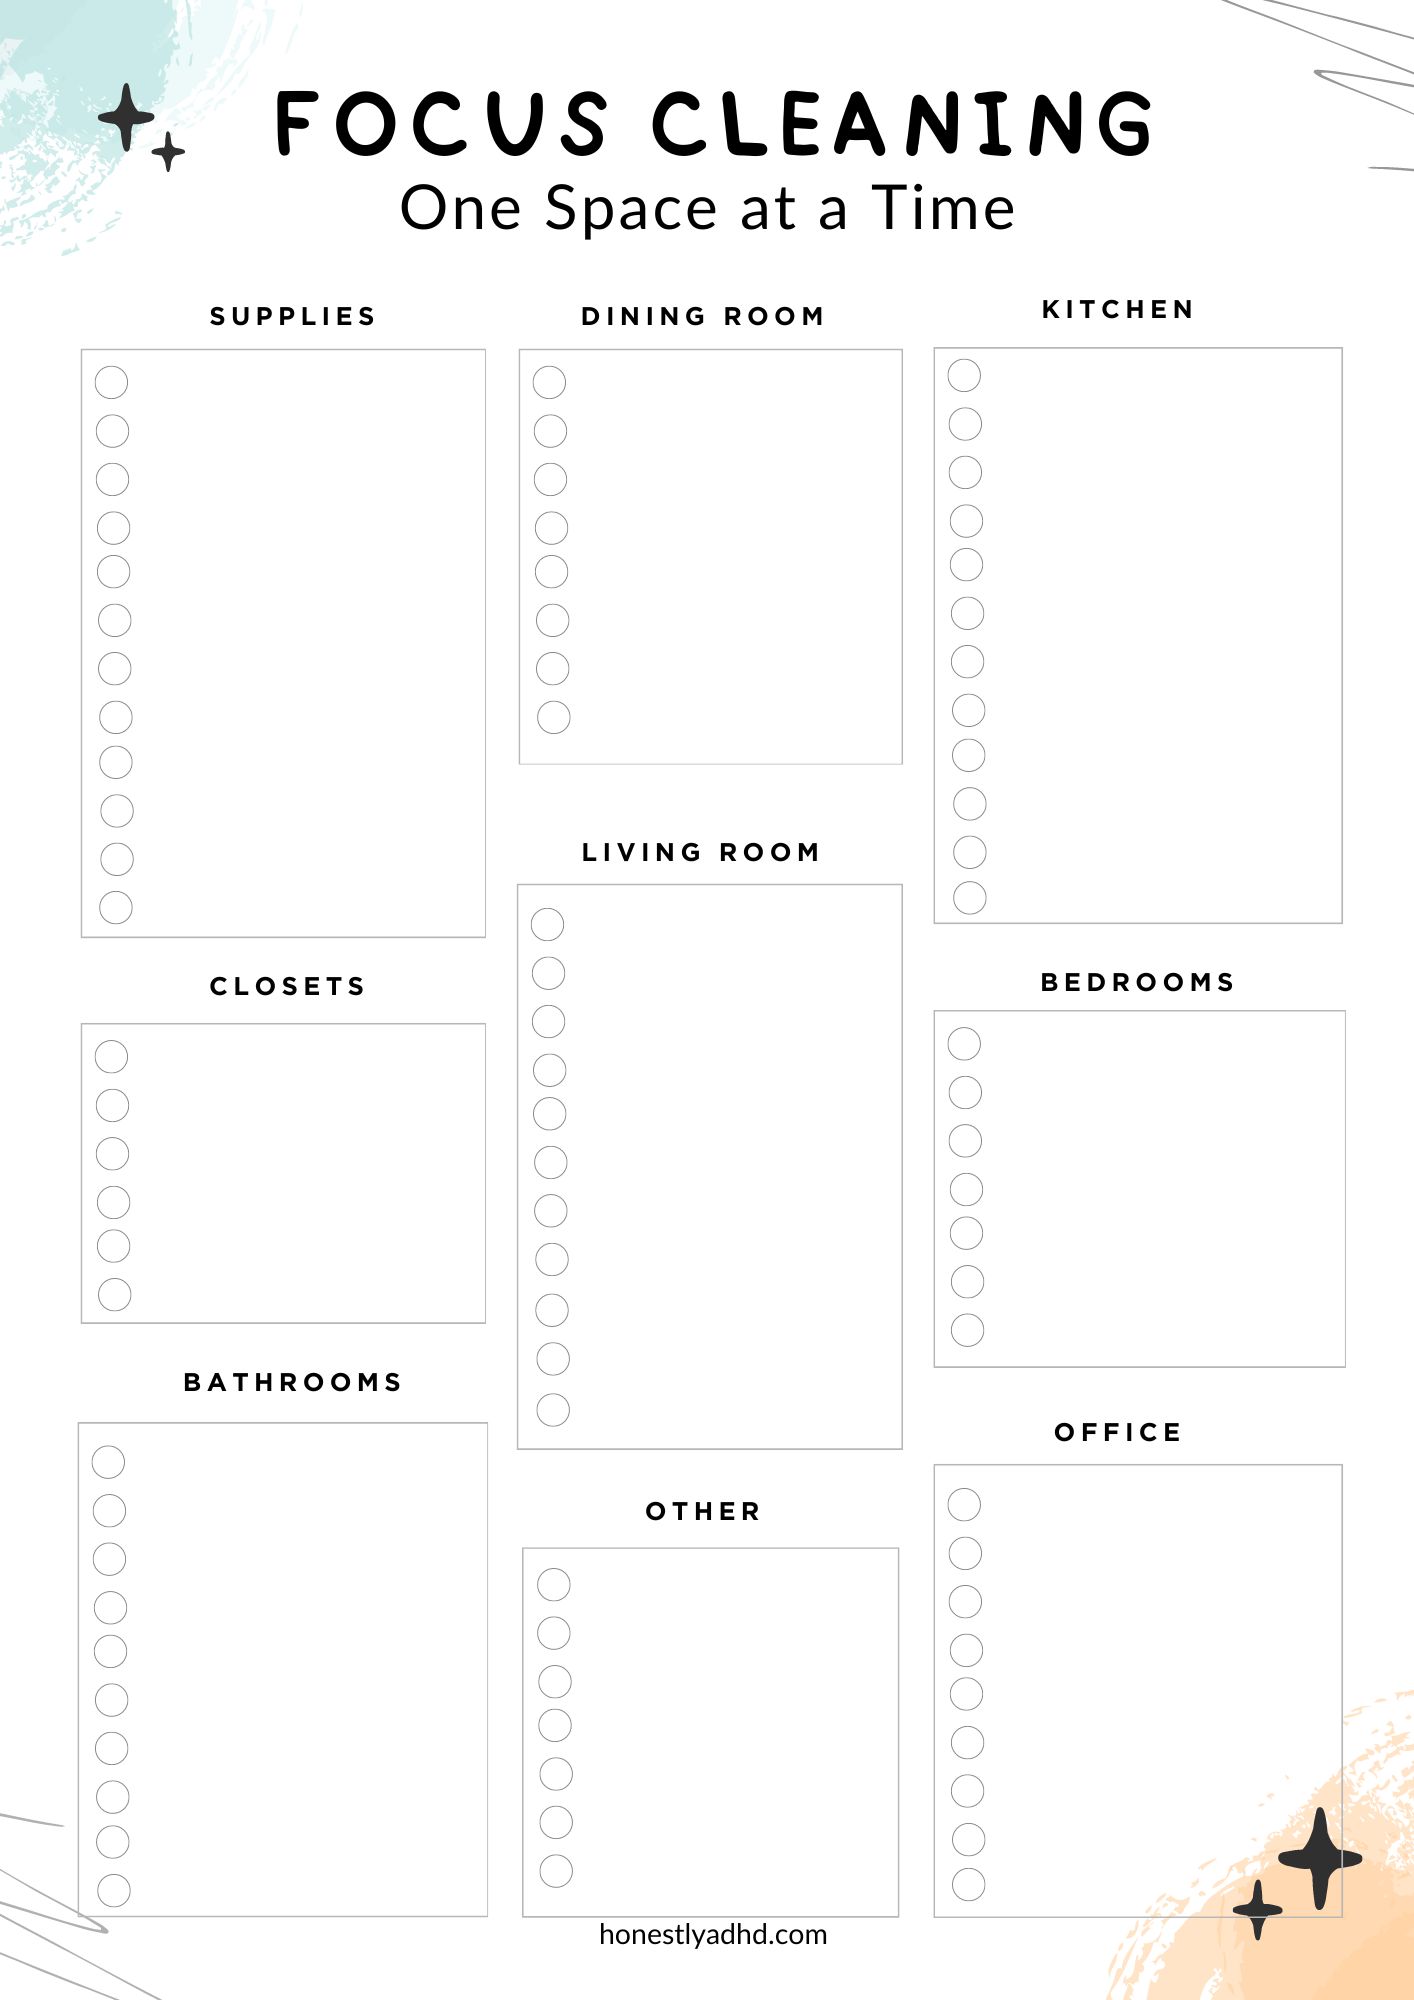 An cleaning checklist with empty spots for each room to divide cleaning tasks by room.